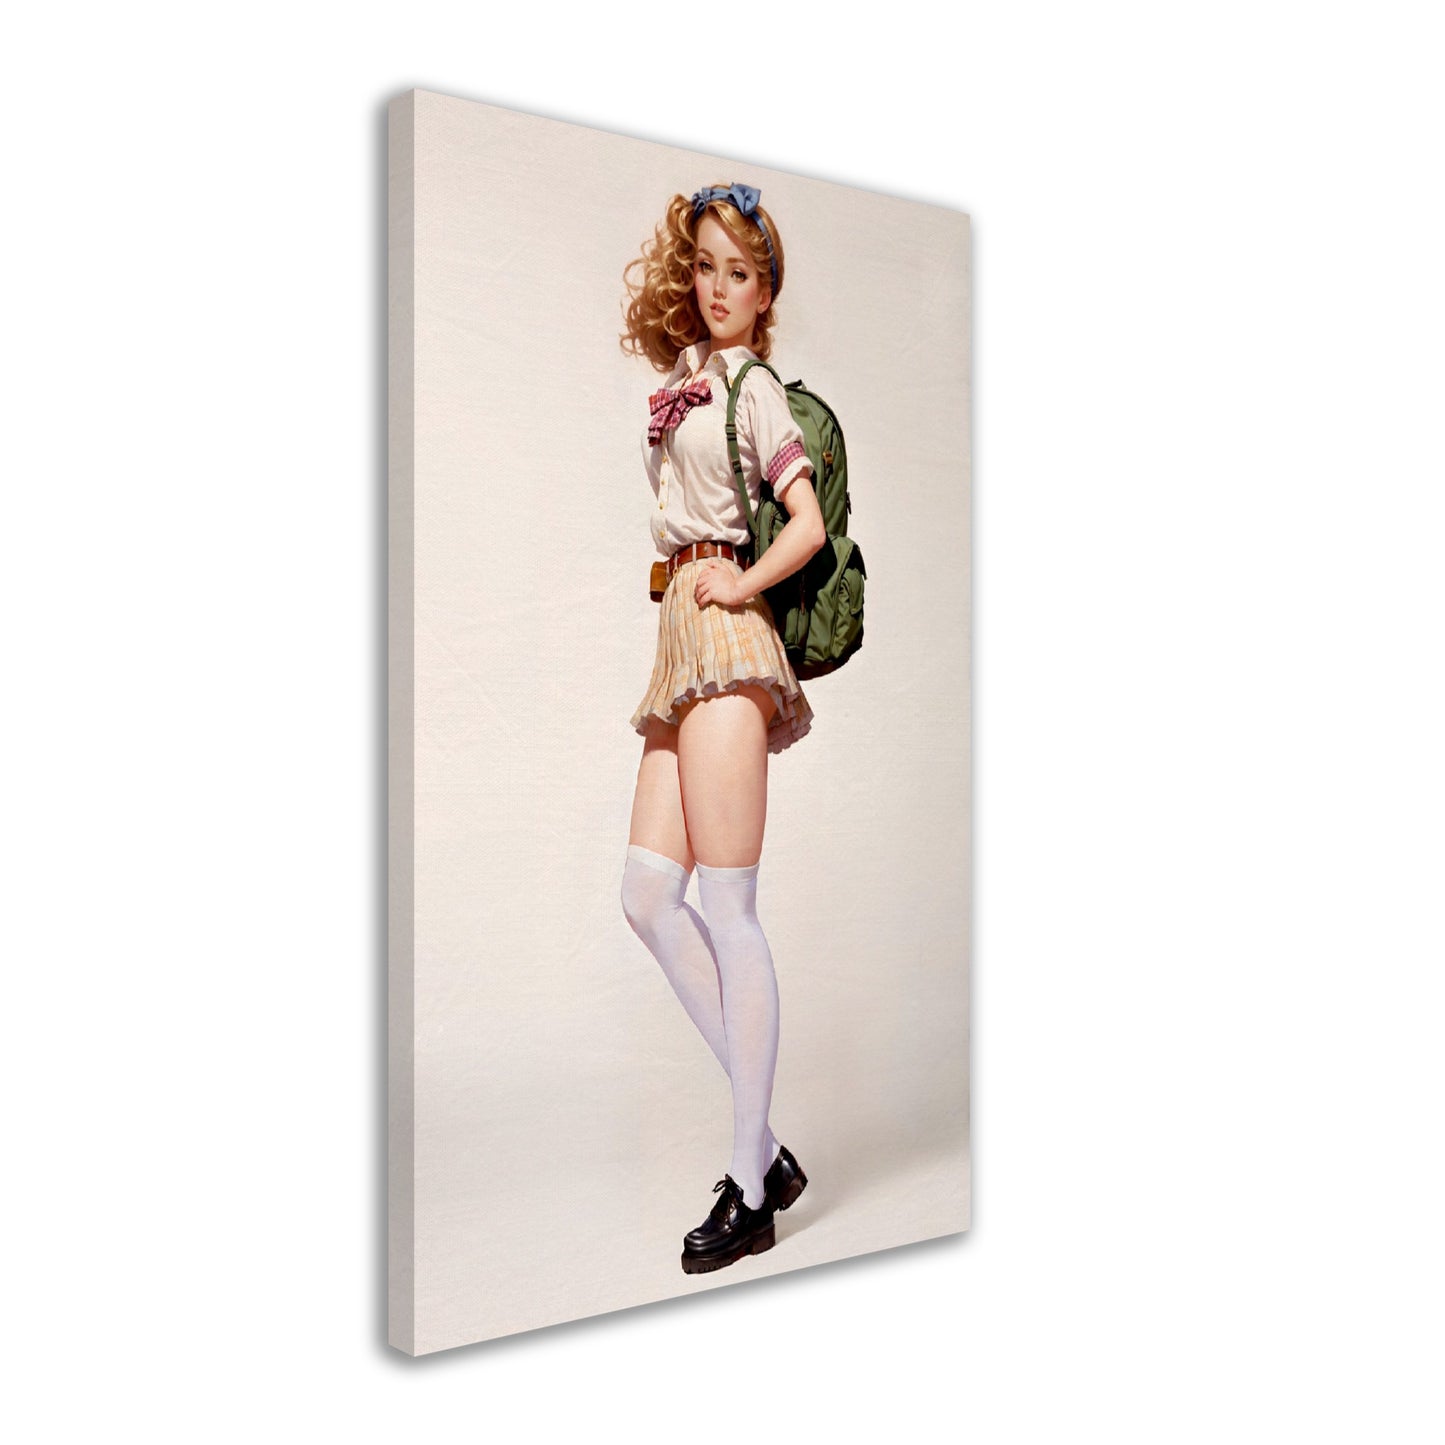 Daily Pinup #15 - School Girl Coed Pinup Wall Art